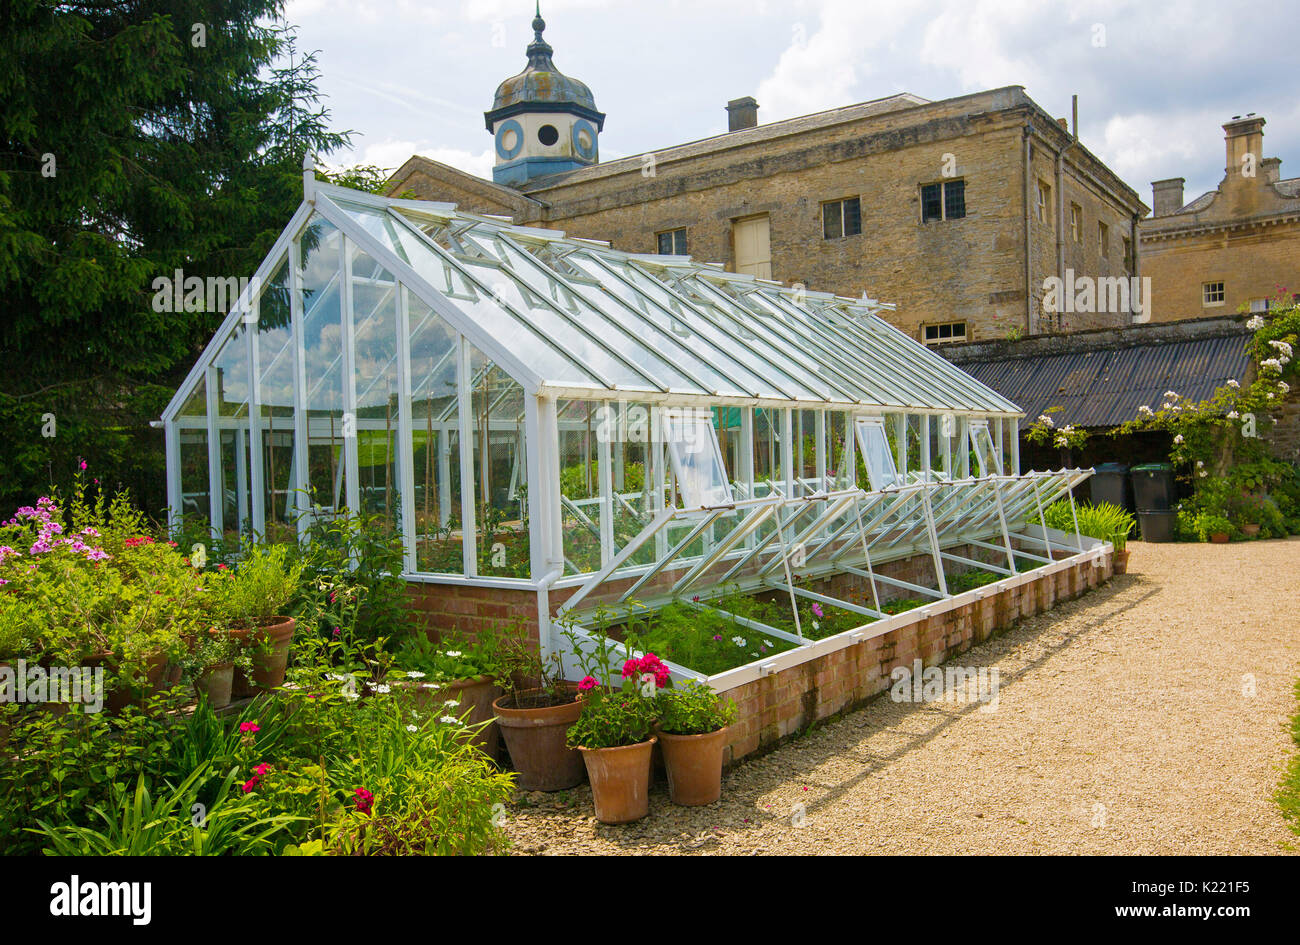 Greenhouse with potted plants and brightly coloured flowers beside it at Rousham gardens, Oxfordshire, England Stock Photo